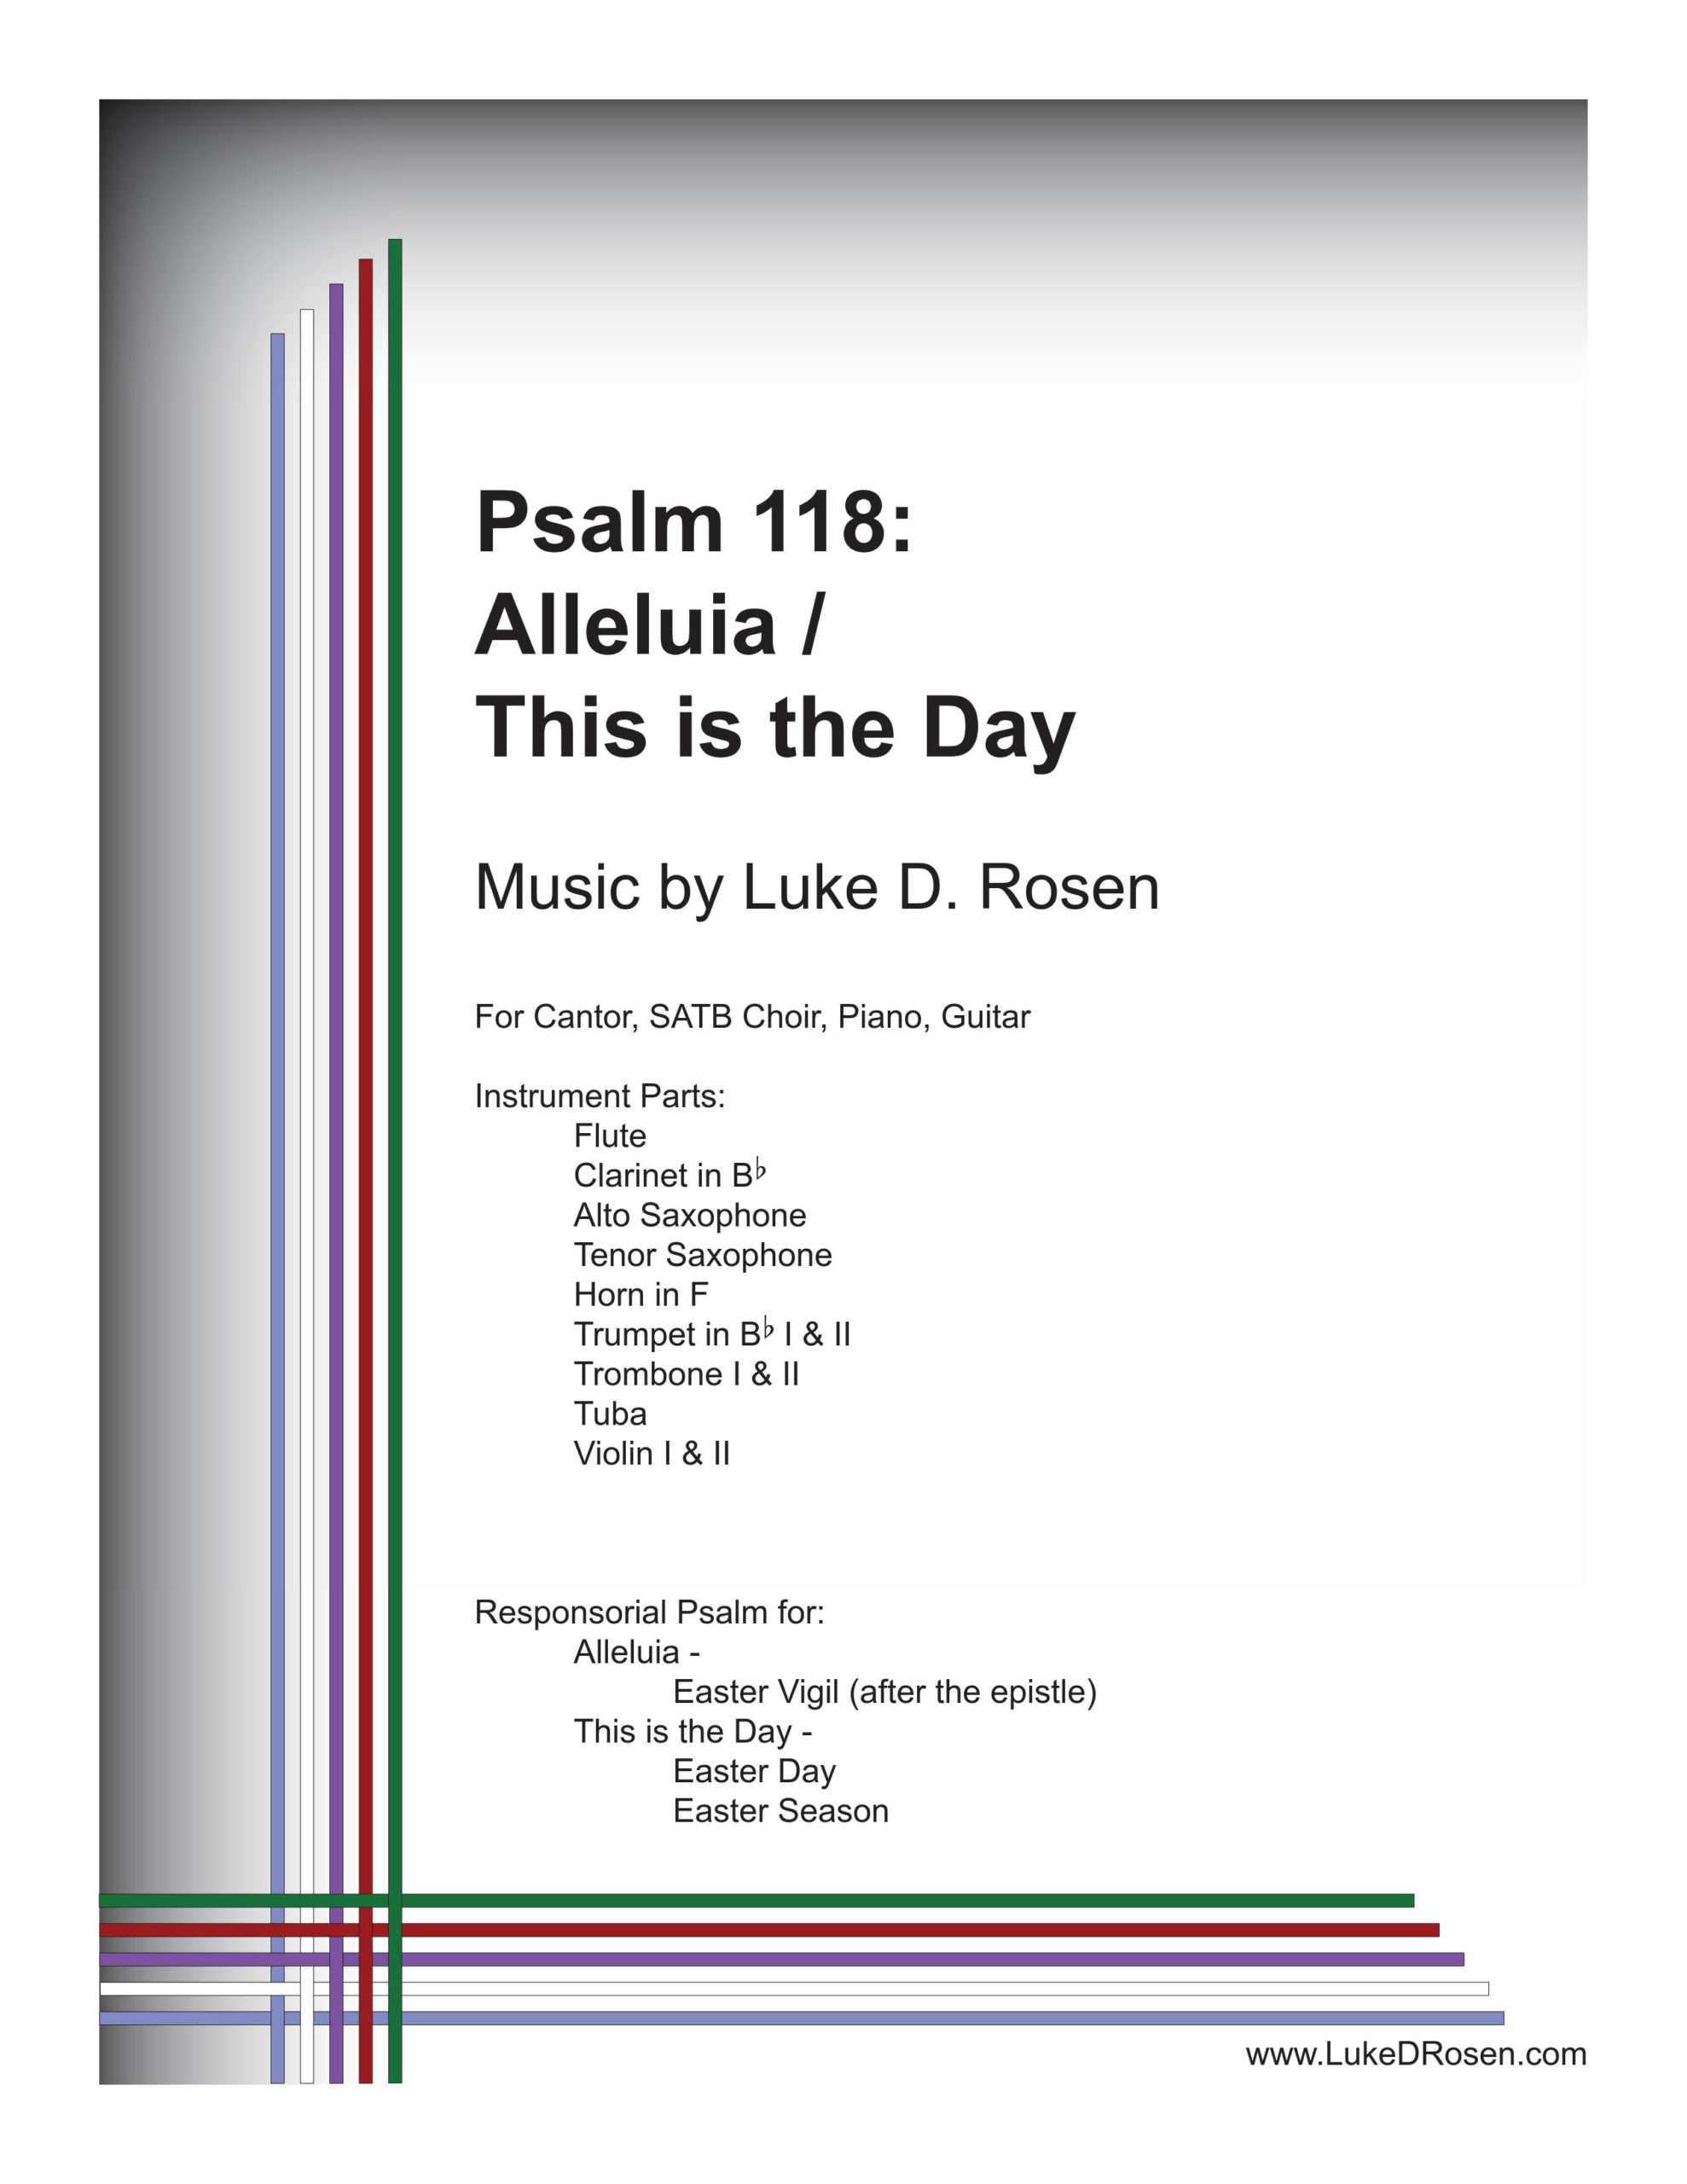 Psalm 118 – Alleluia_This is the Day (Rosen)